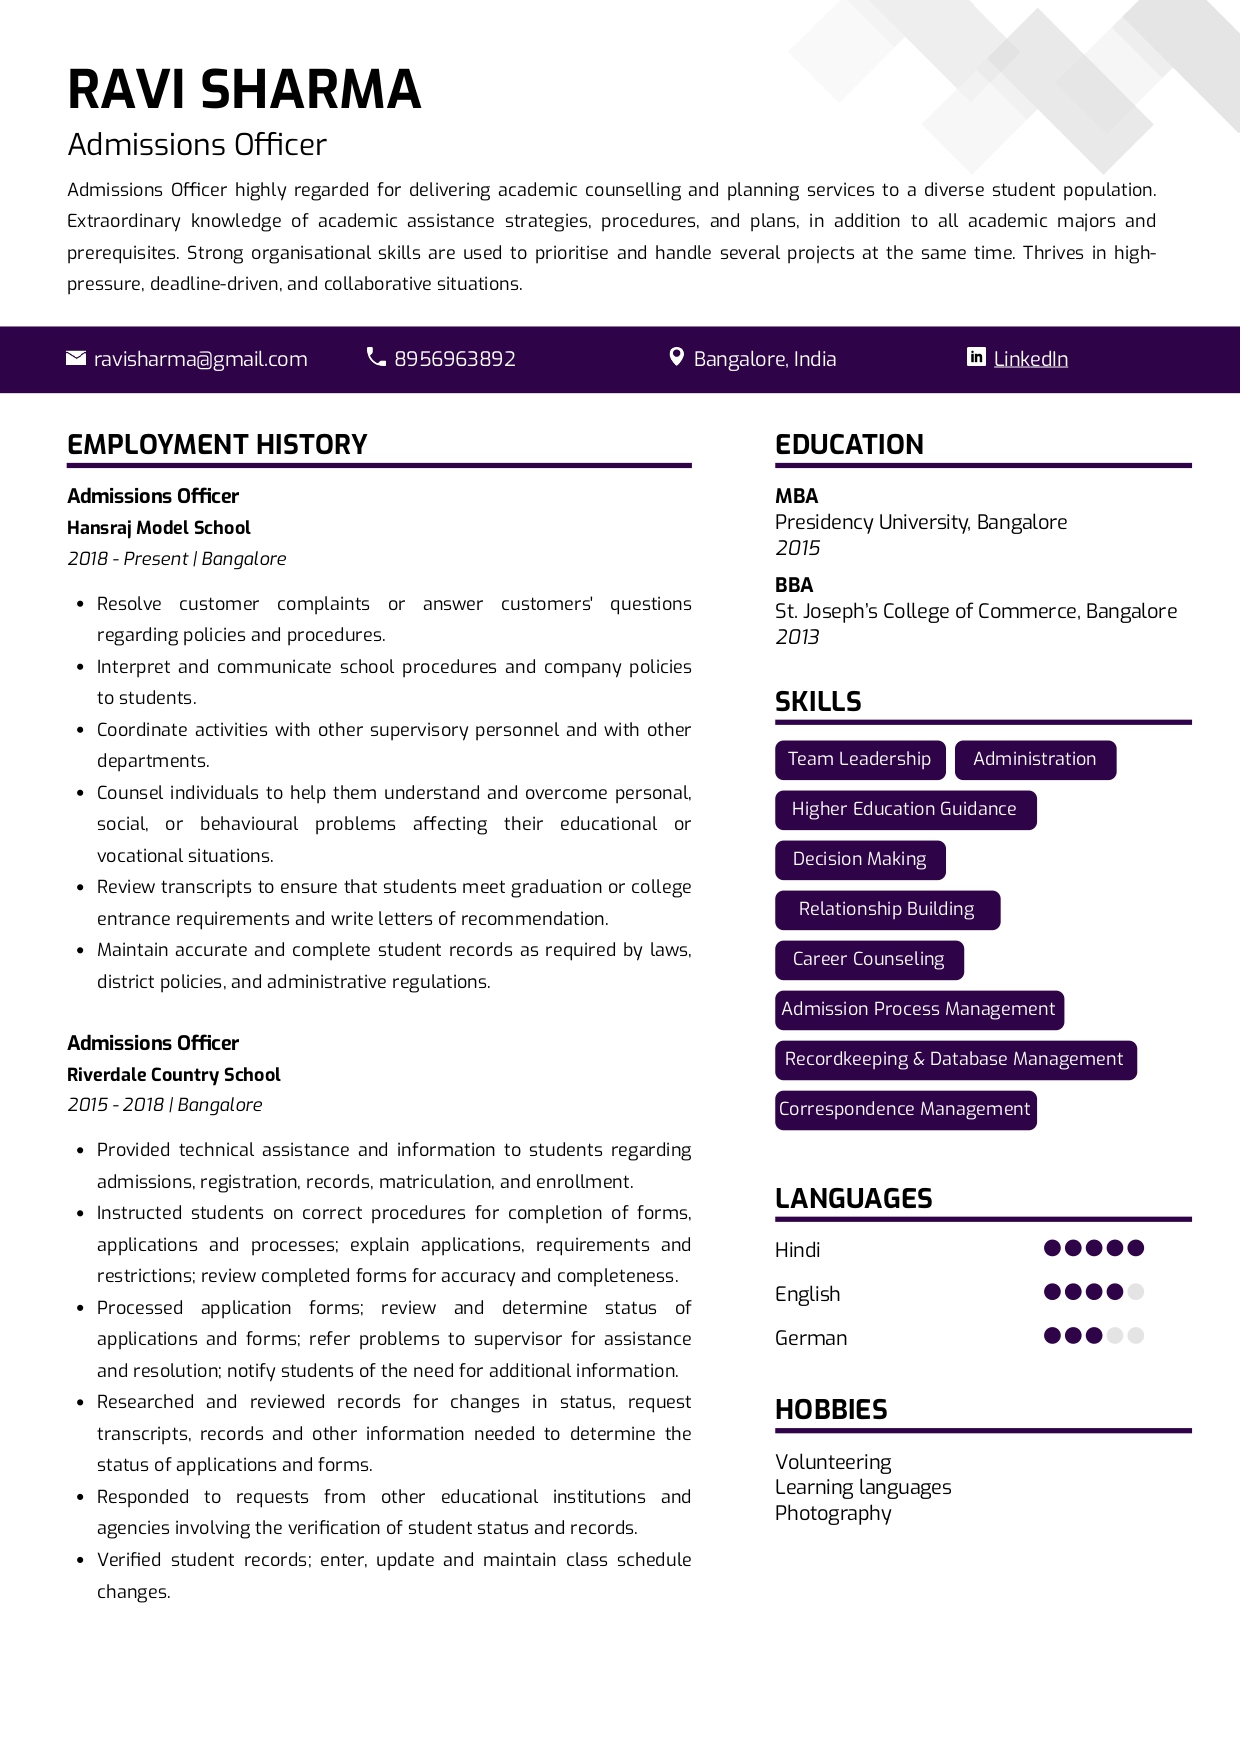 Resume of Admissions Officer